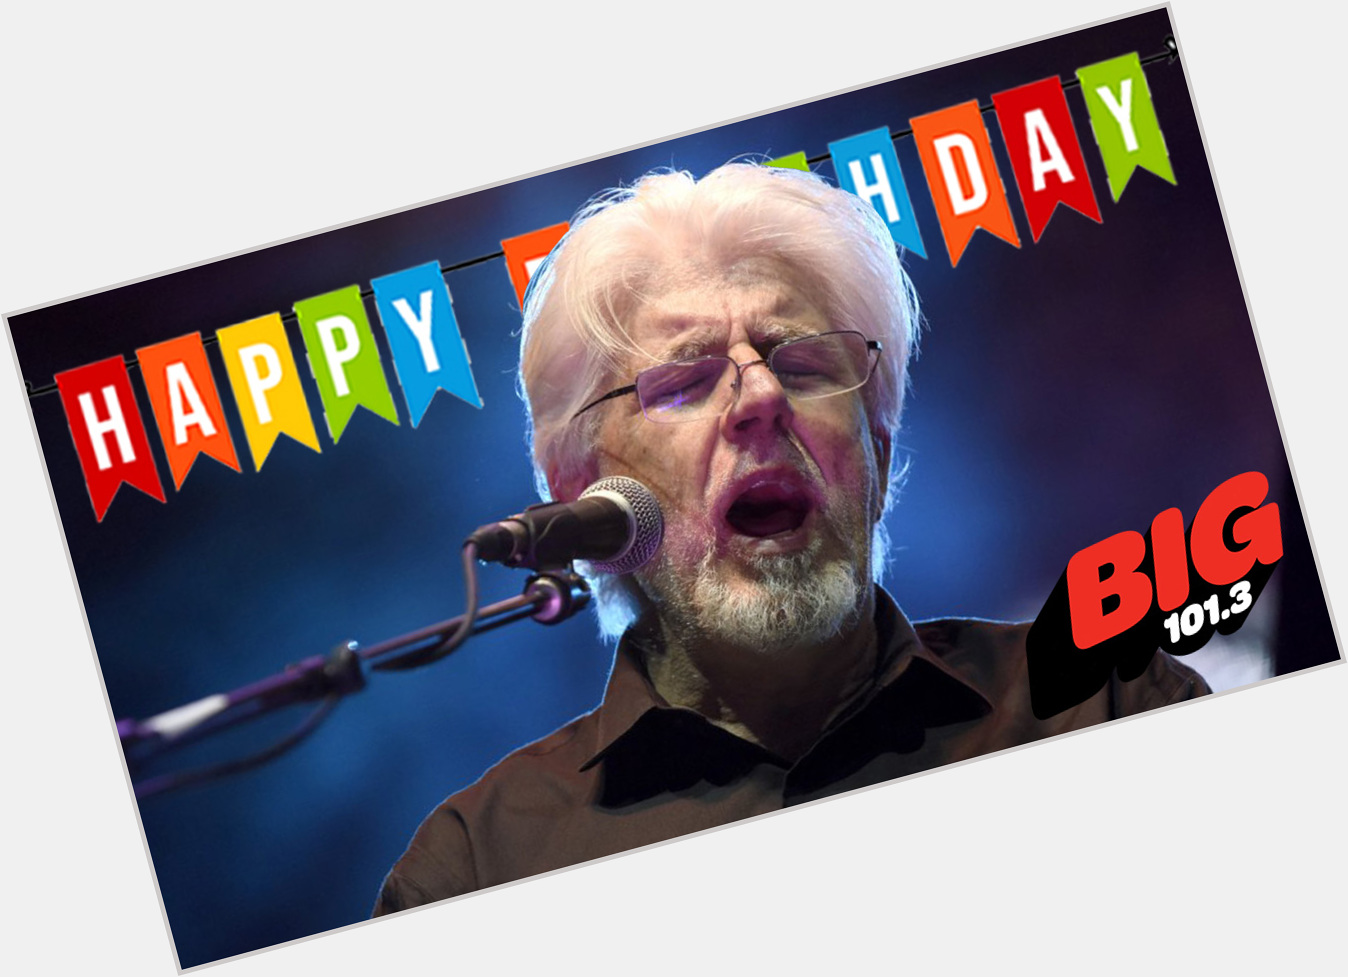 BIG Happy Birthday wishes go out to Michael McDonald... he turns 69 today!   